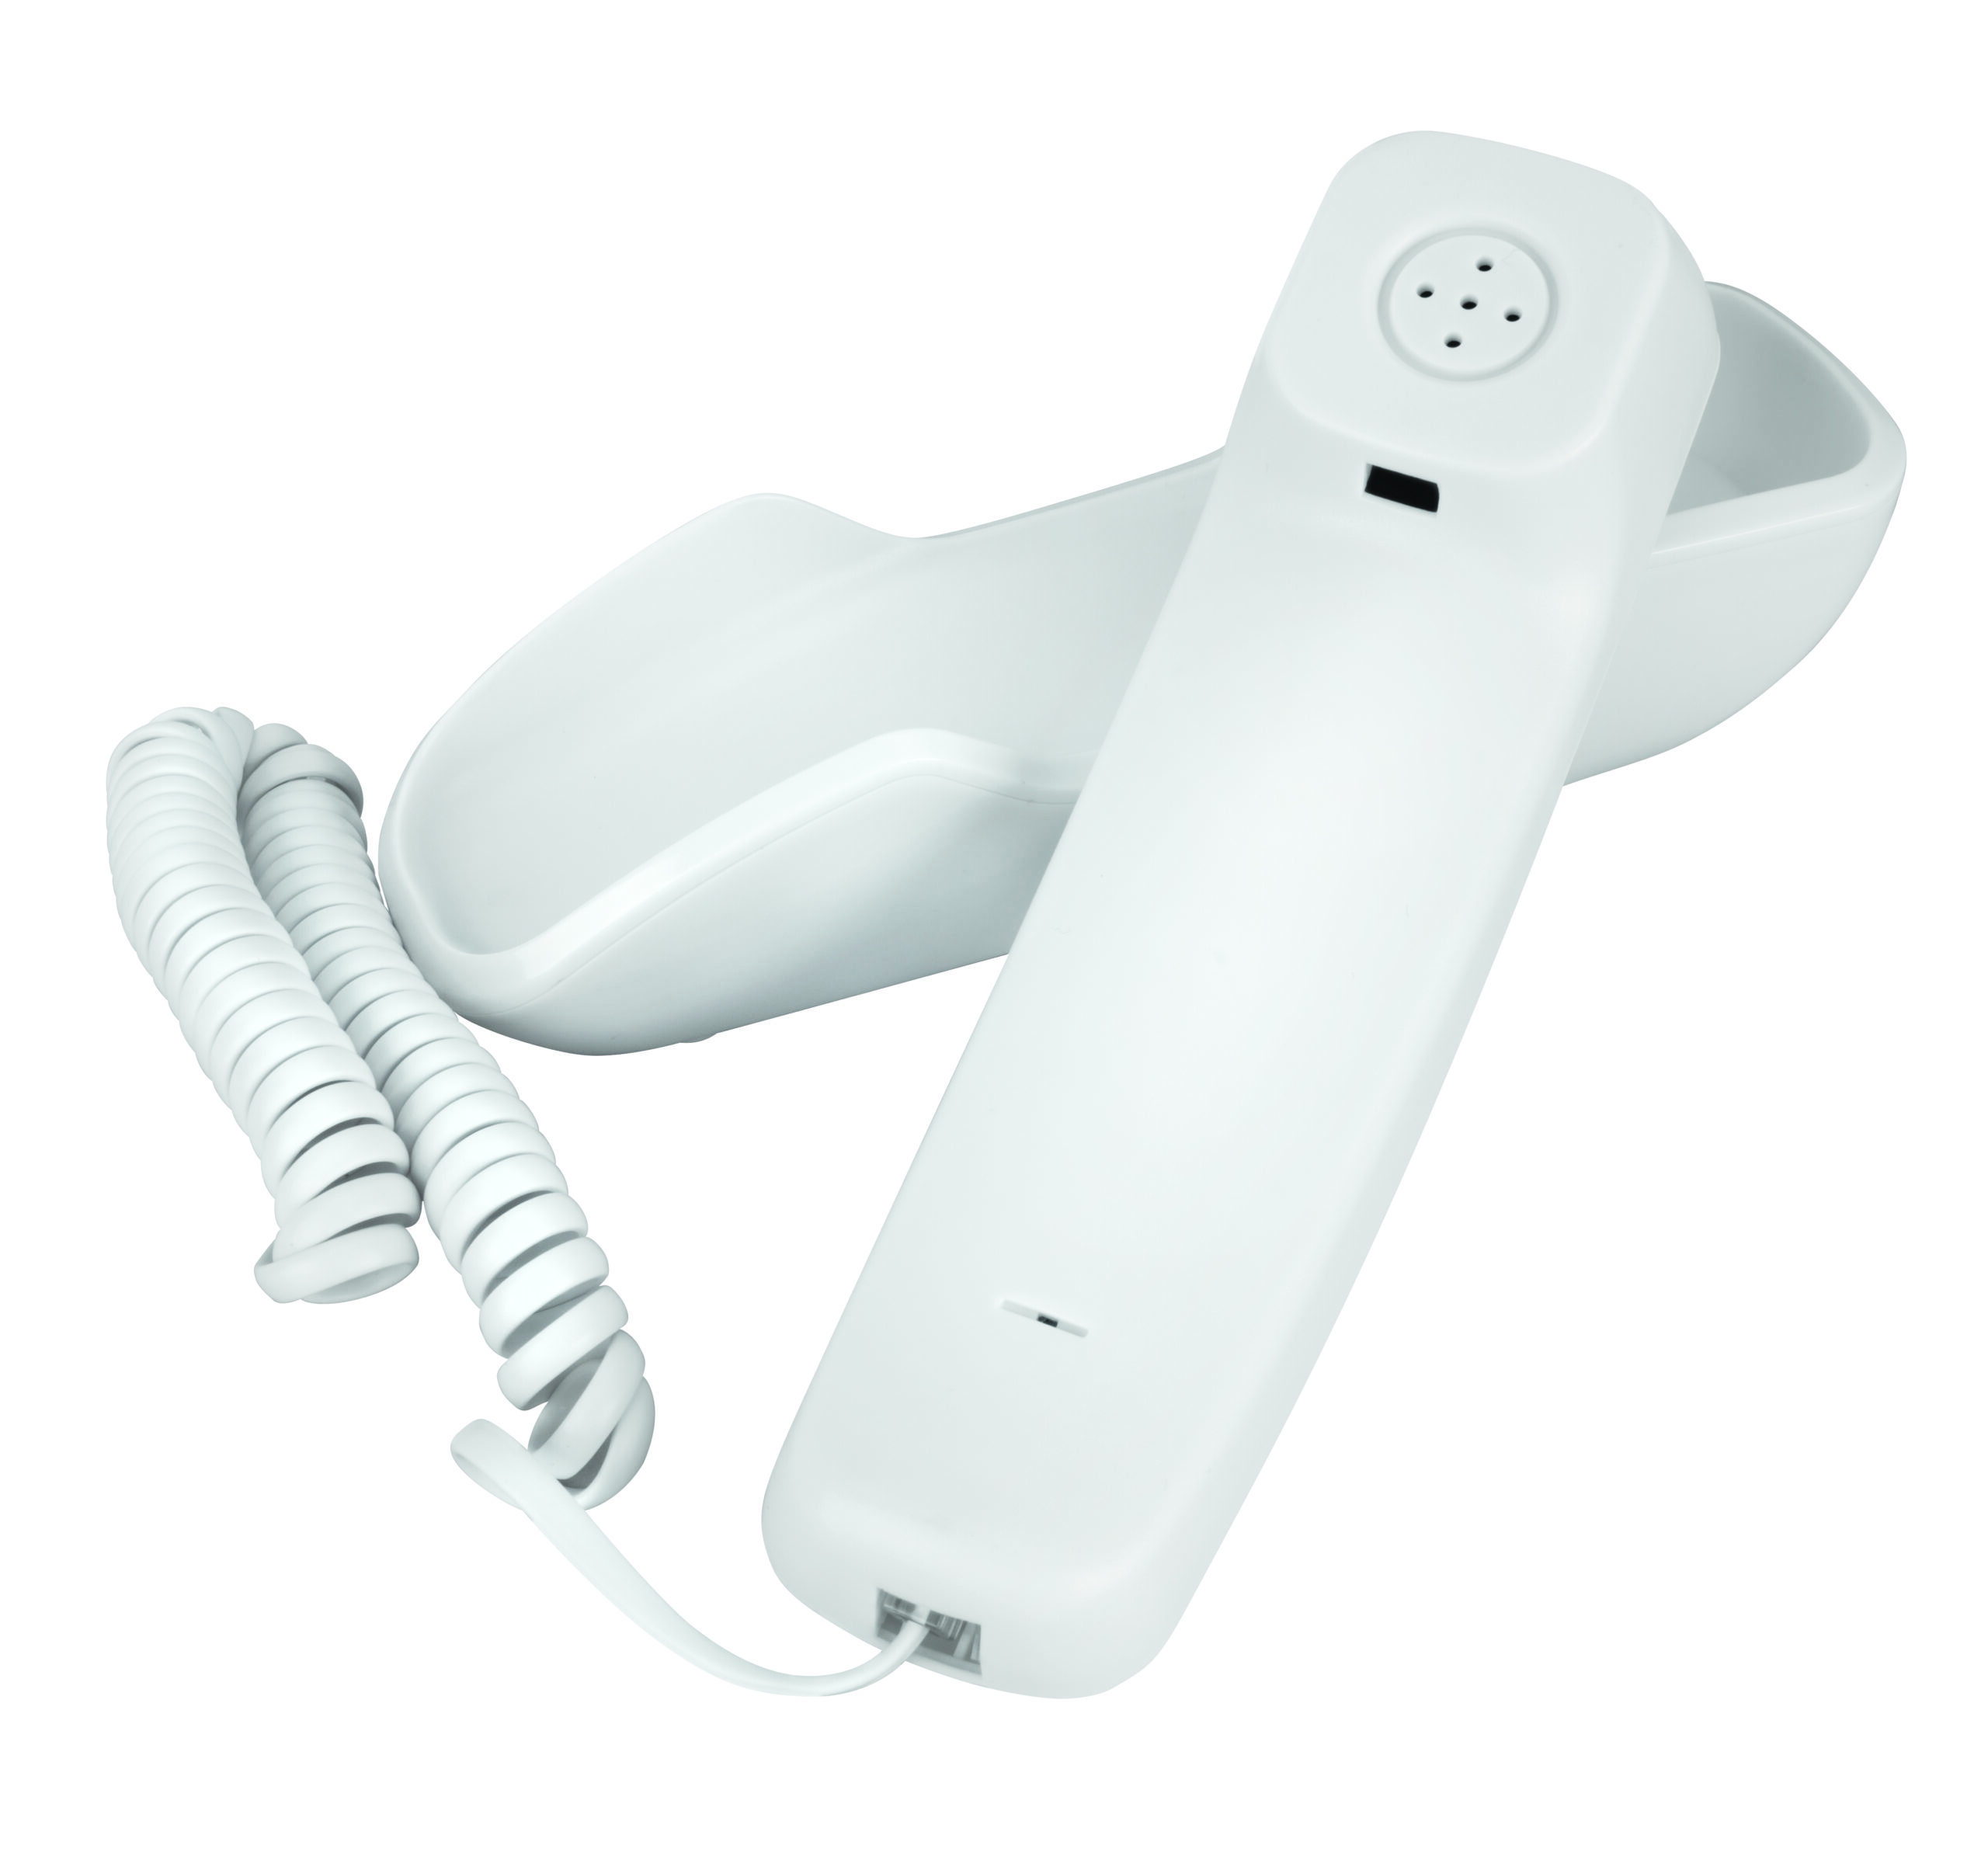 Home Plus Slim Corded Telephone With Caller Id